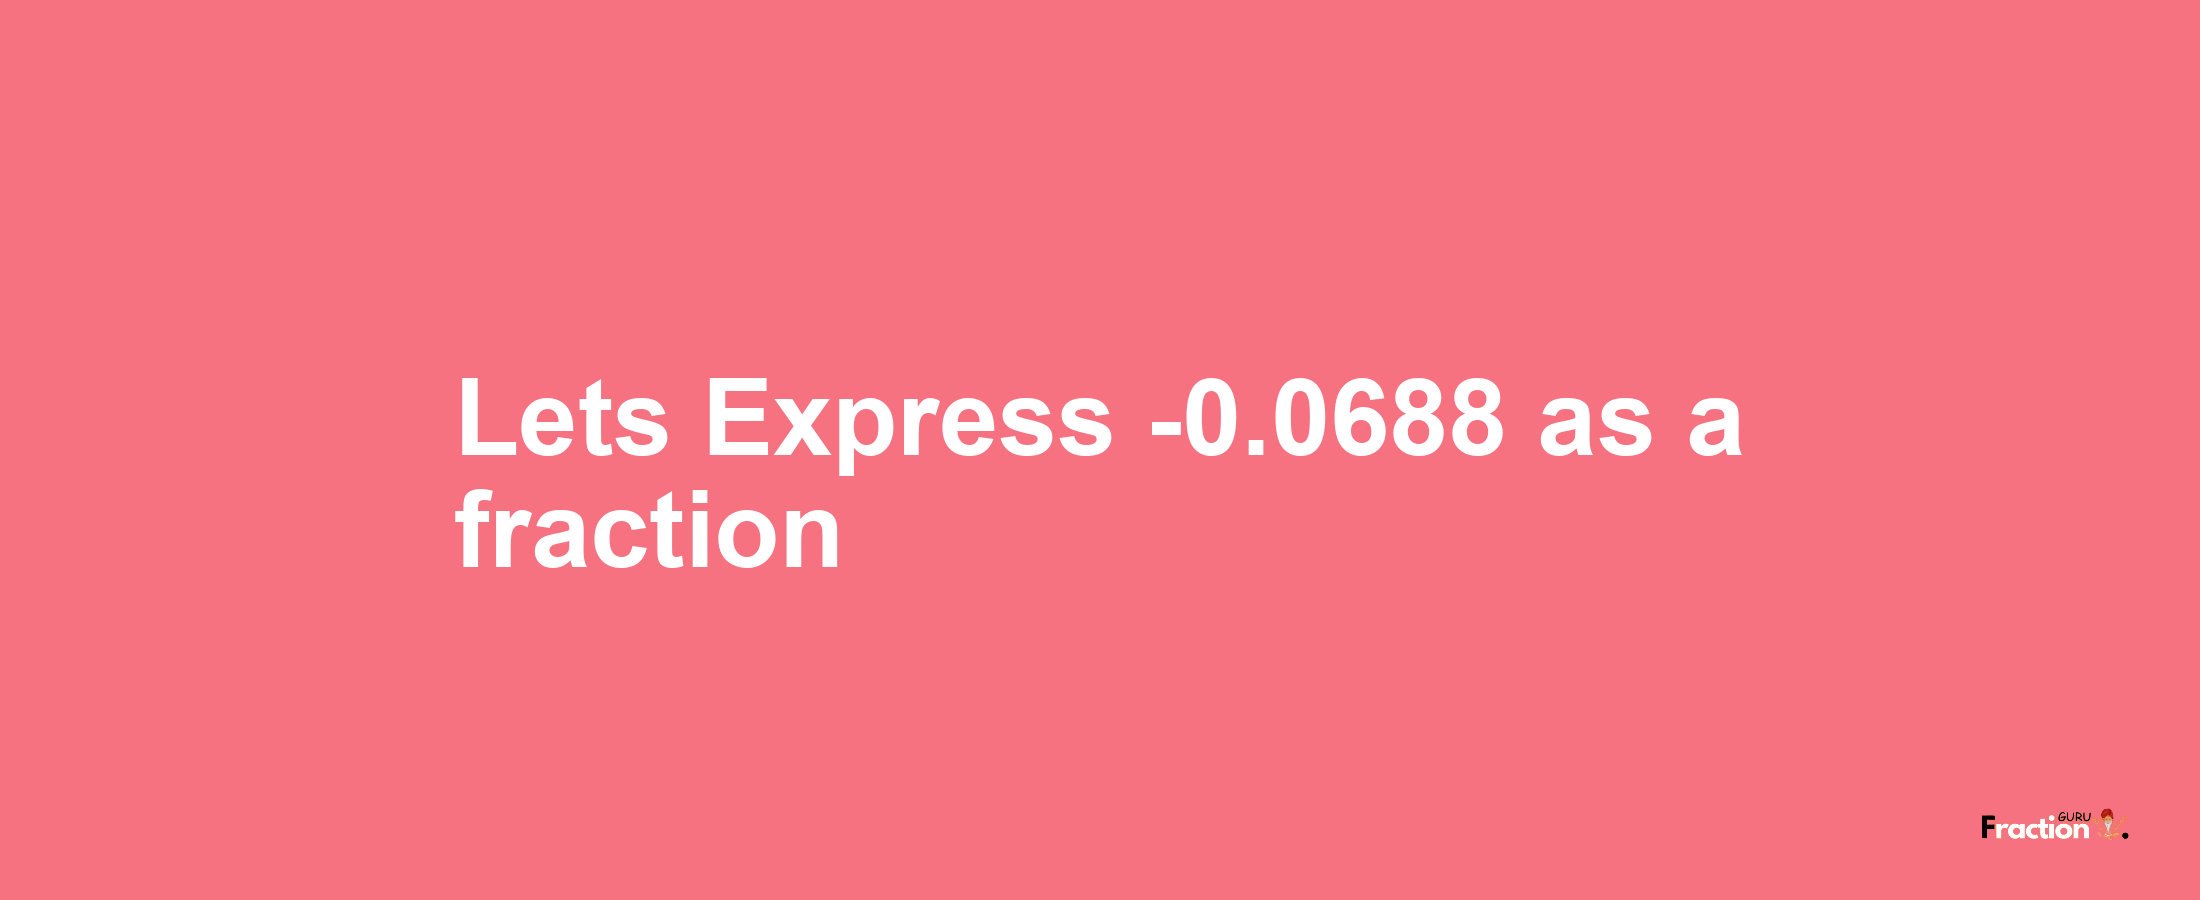 Lets Express -0.0688 as afraction